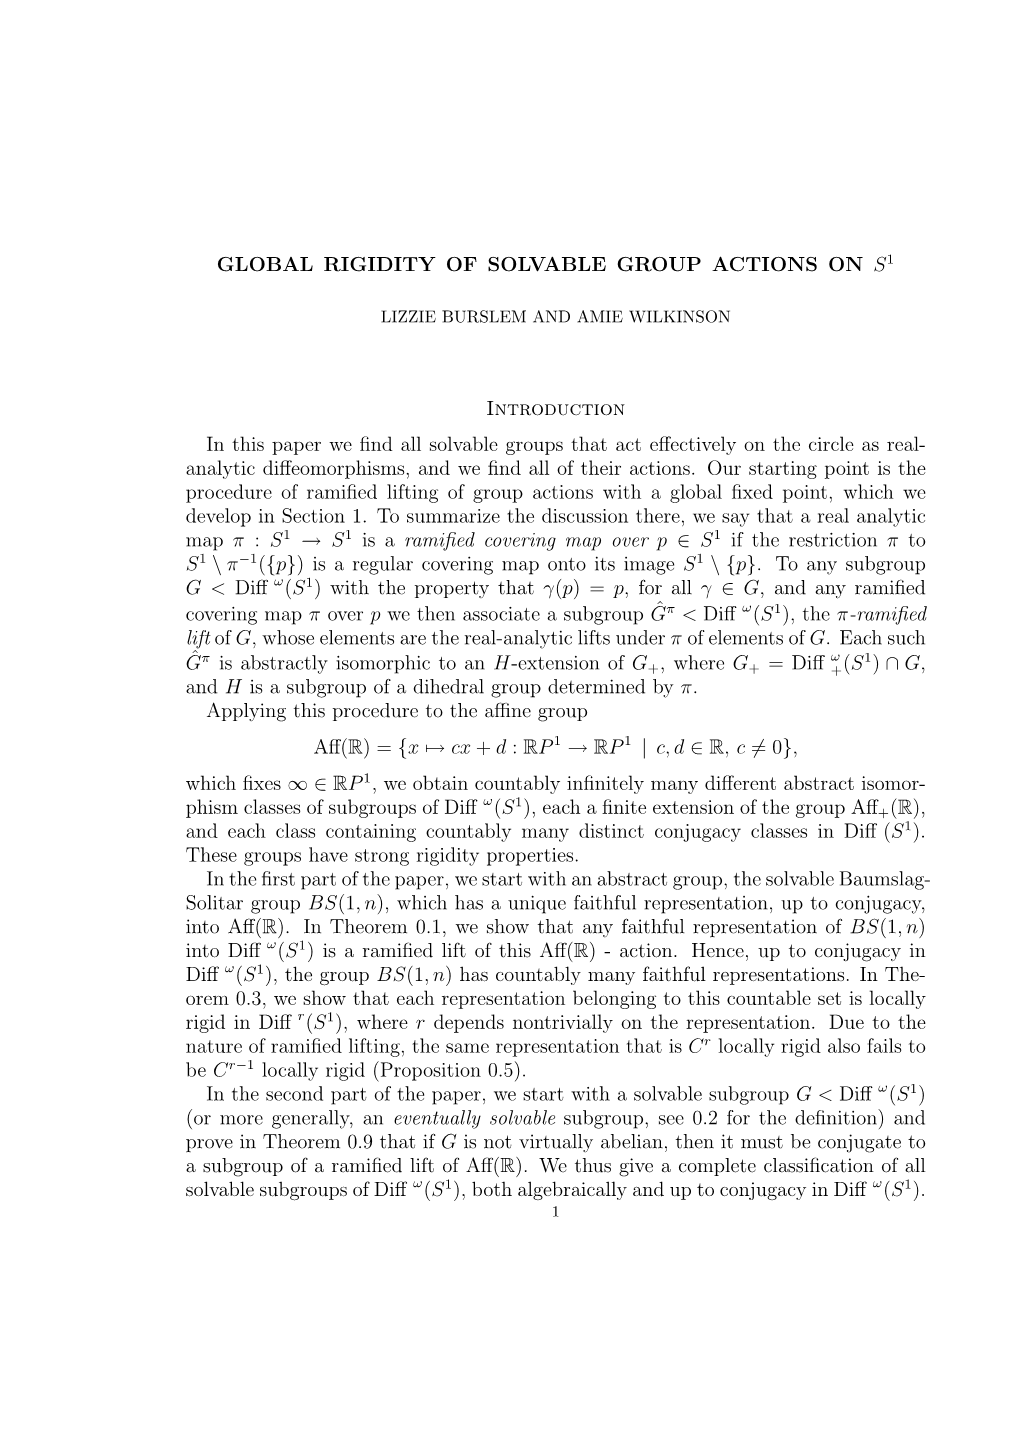 Global Rigidity of Solvable Group Actions on S1